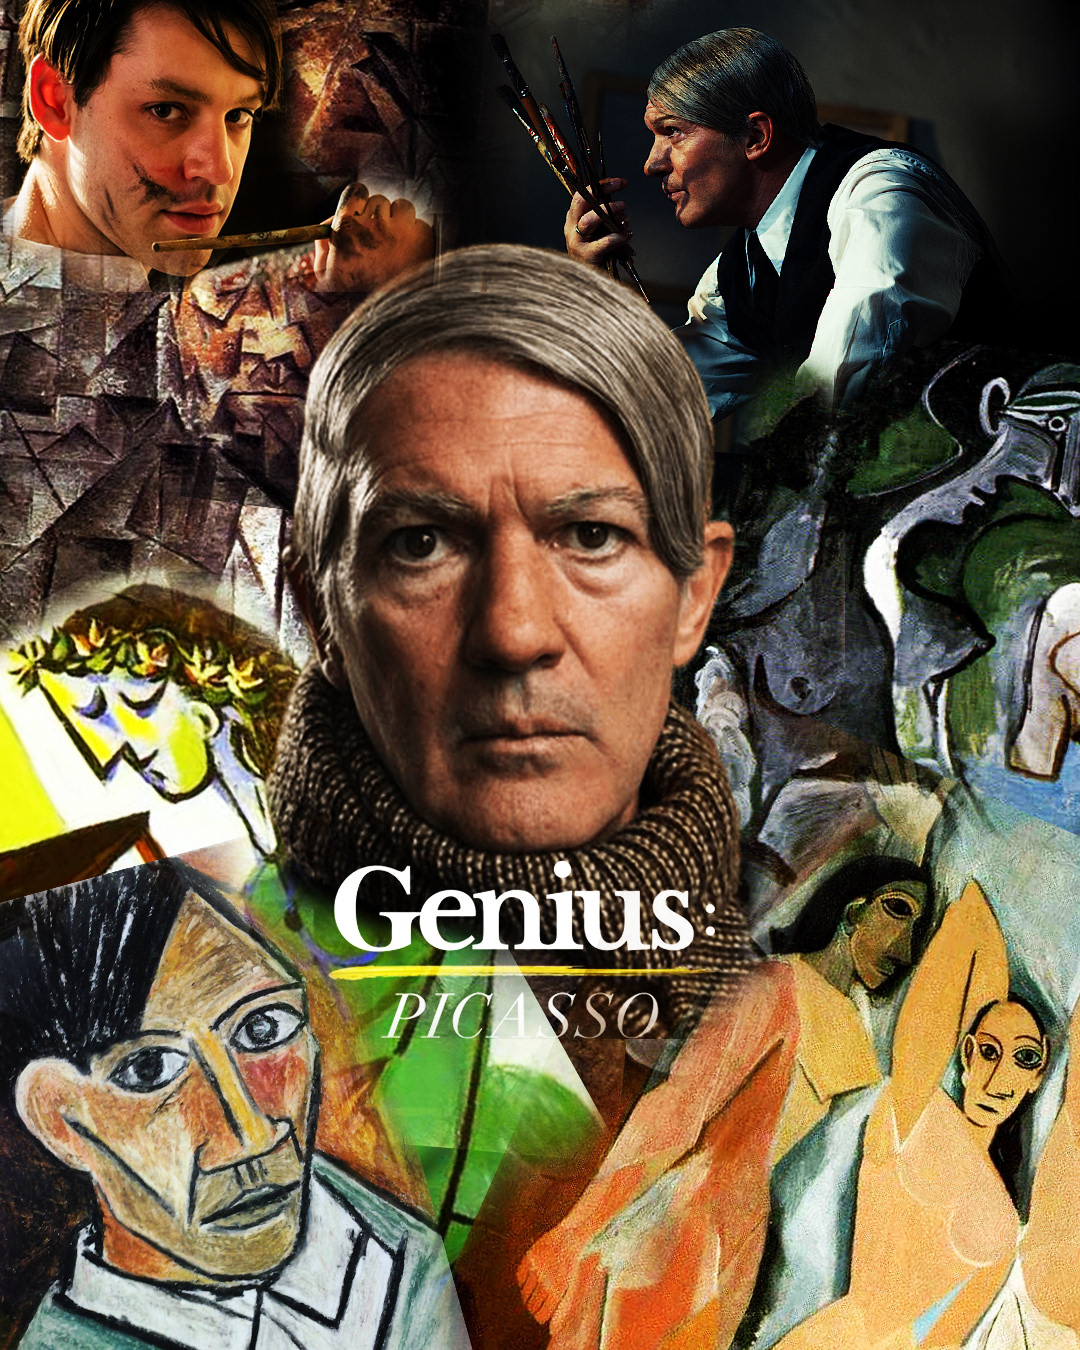 Picasso collage poster photoshop artist